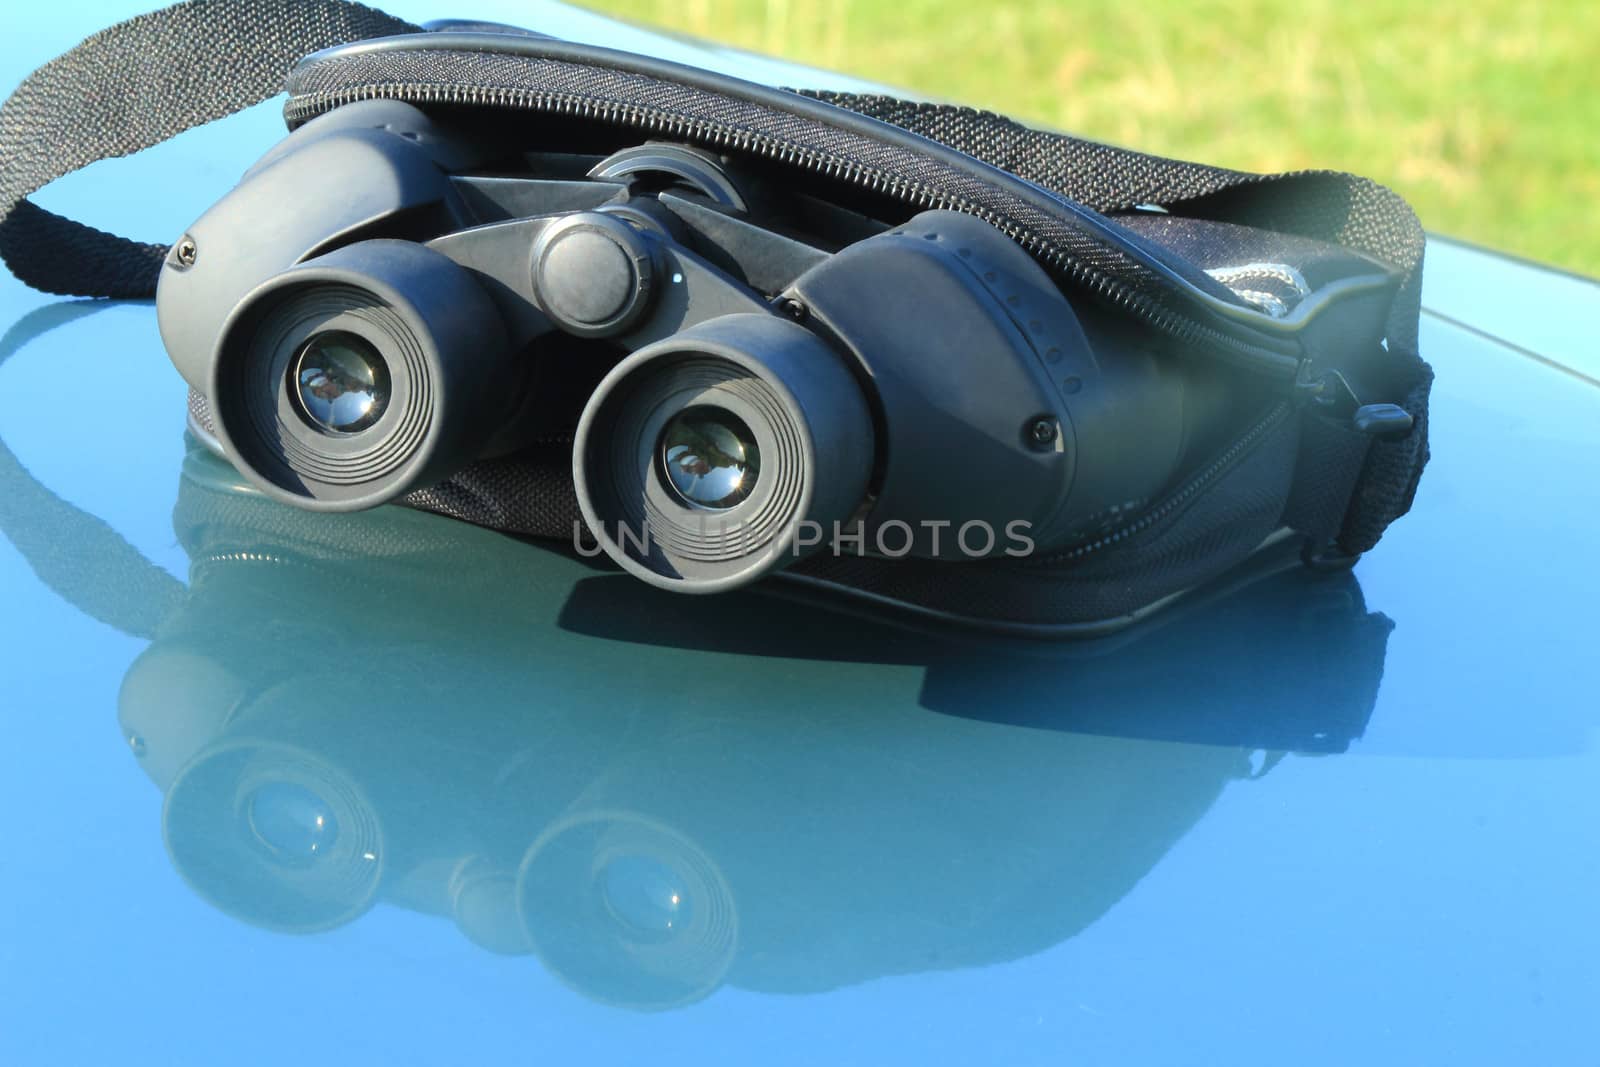 Binoculars in the pouch on the hood of the car. by georgina198